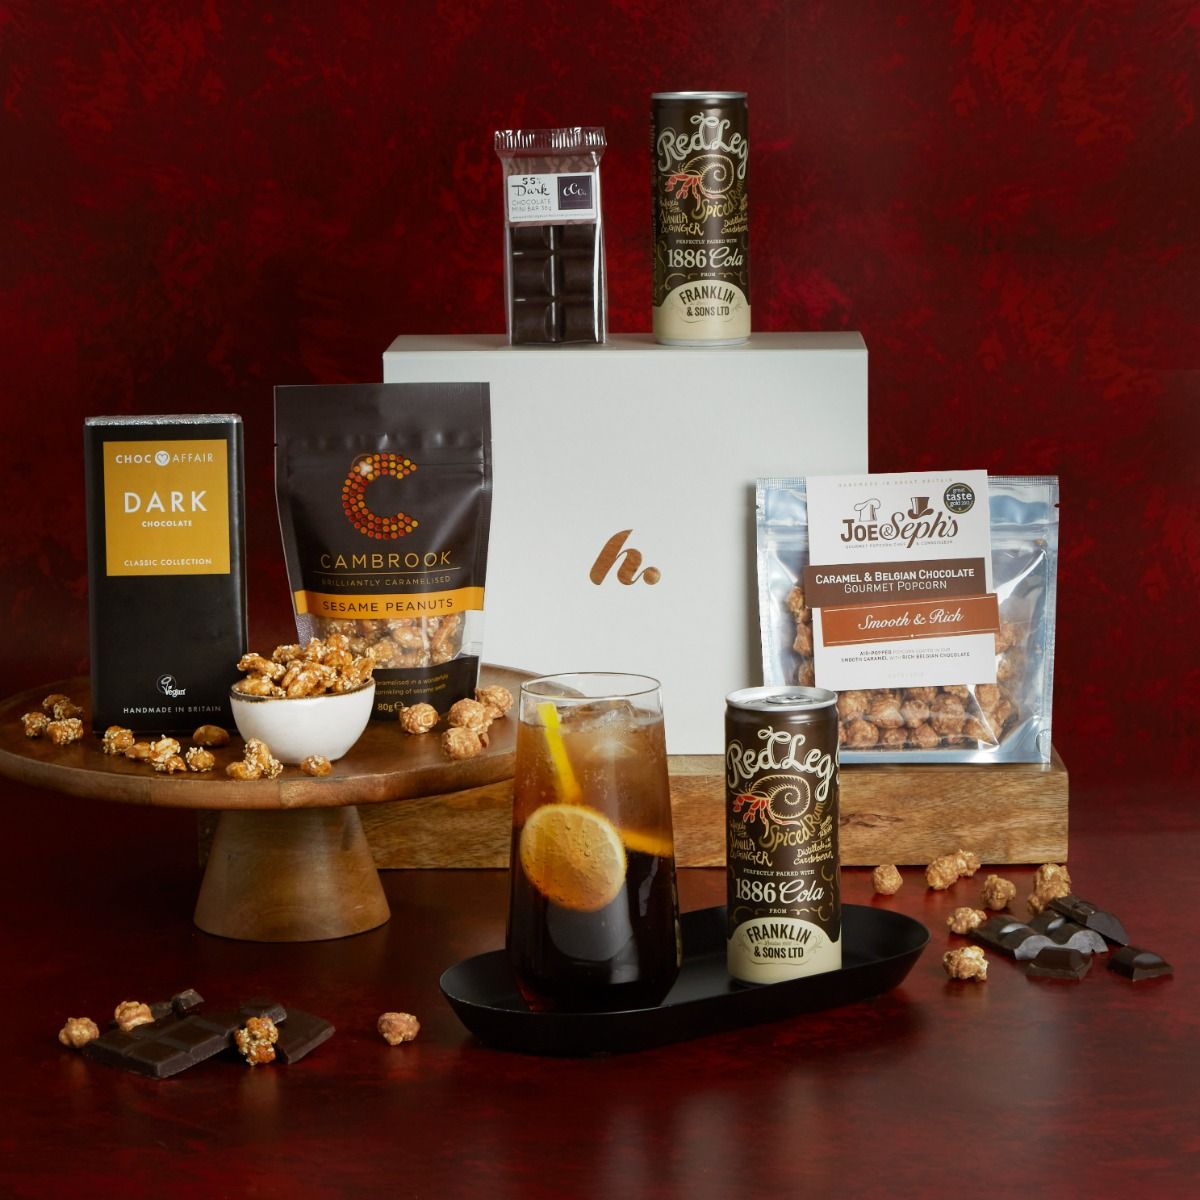 Rum & Treats Hamper with contents on display including gift box